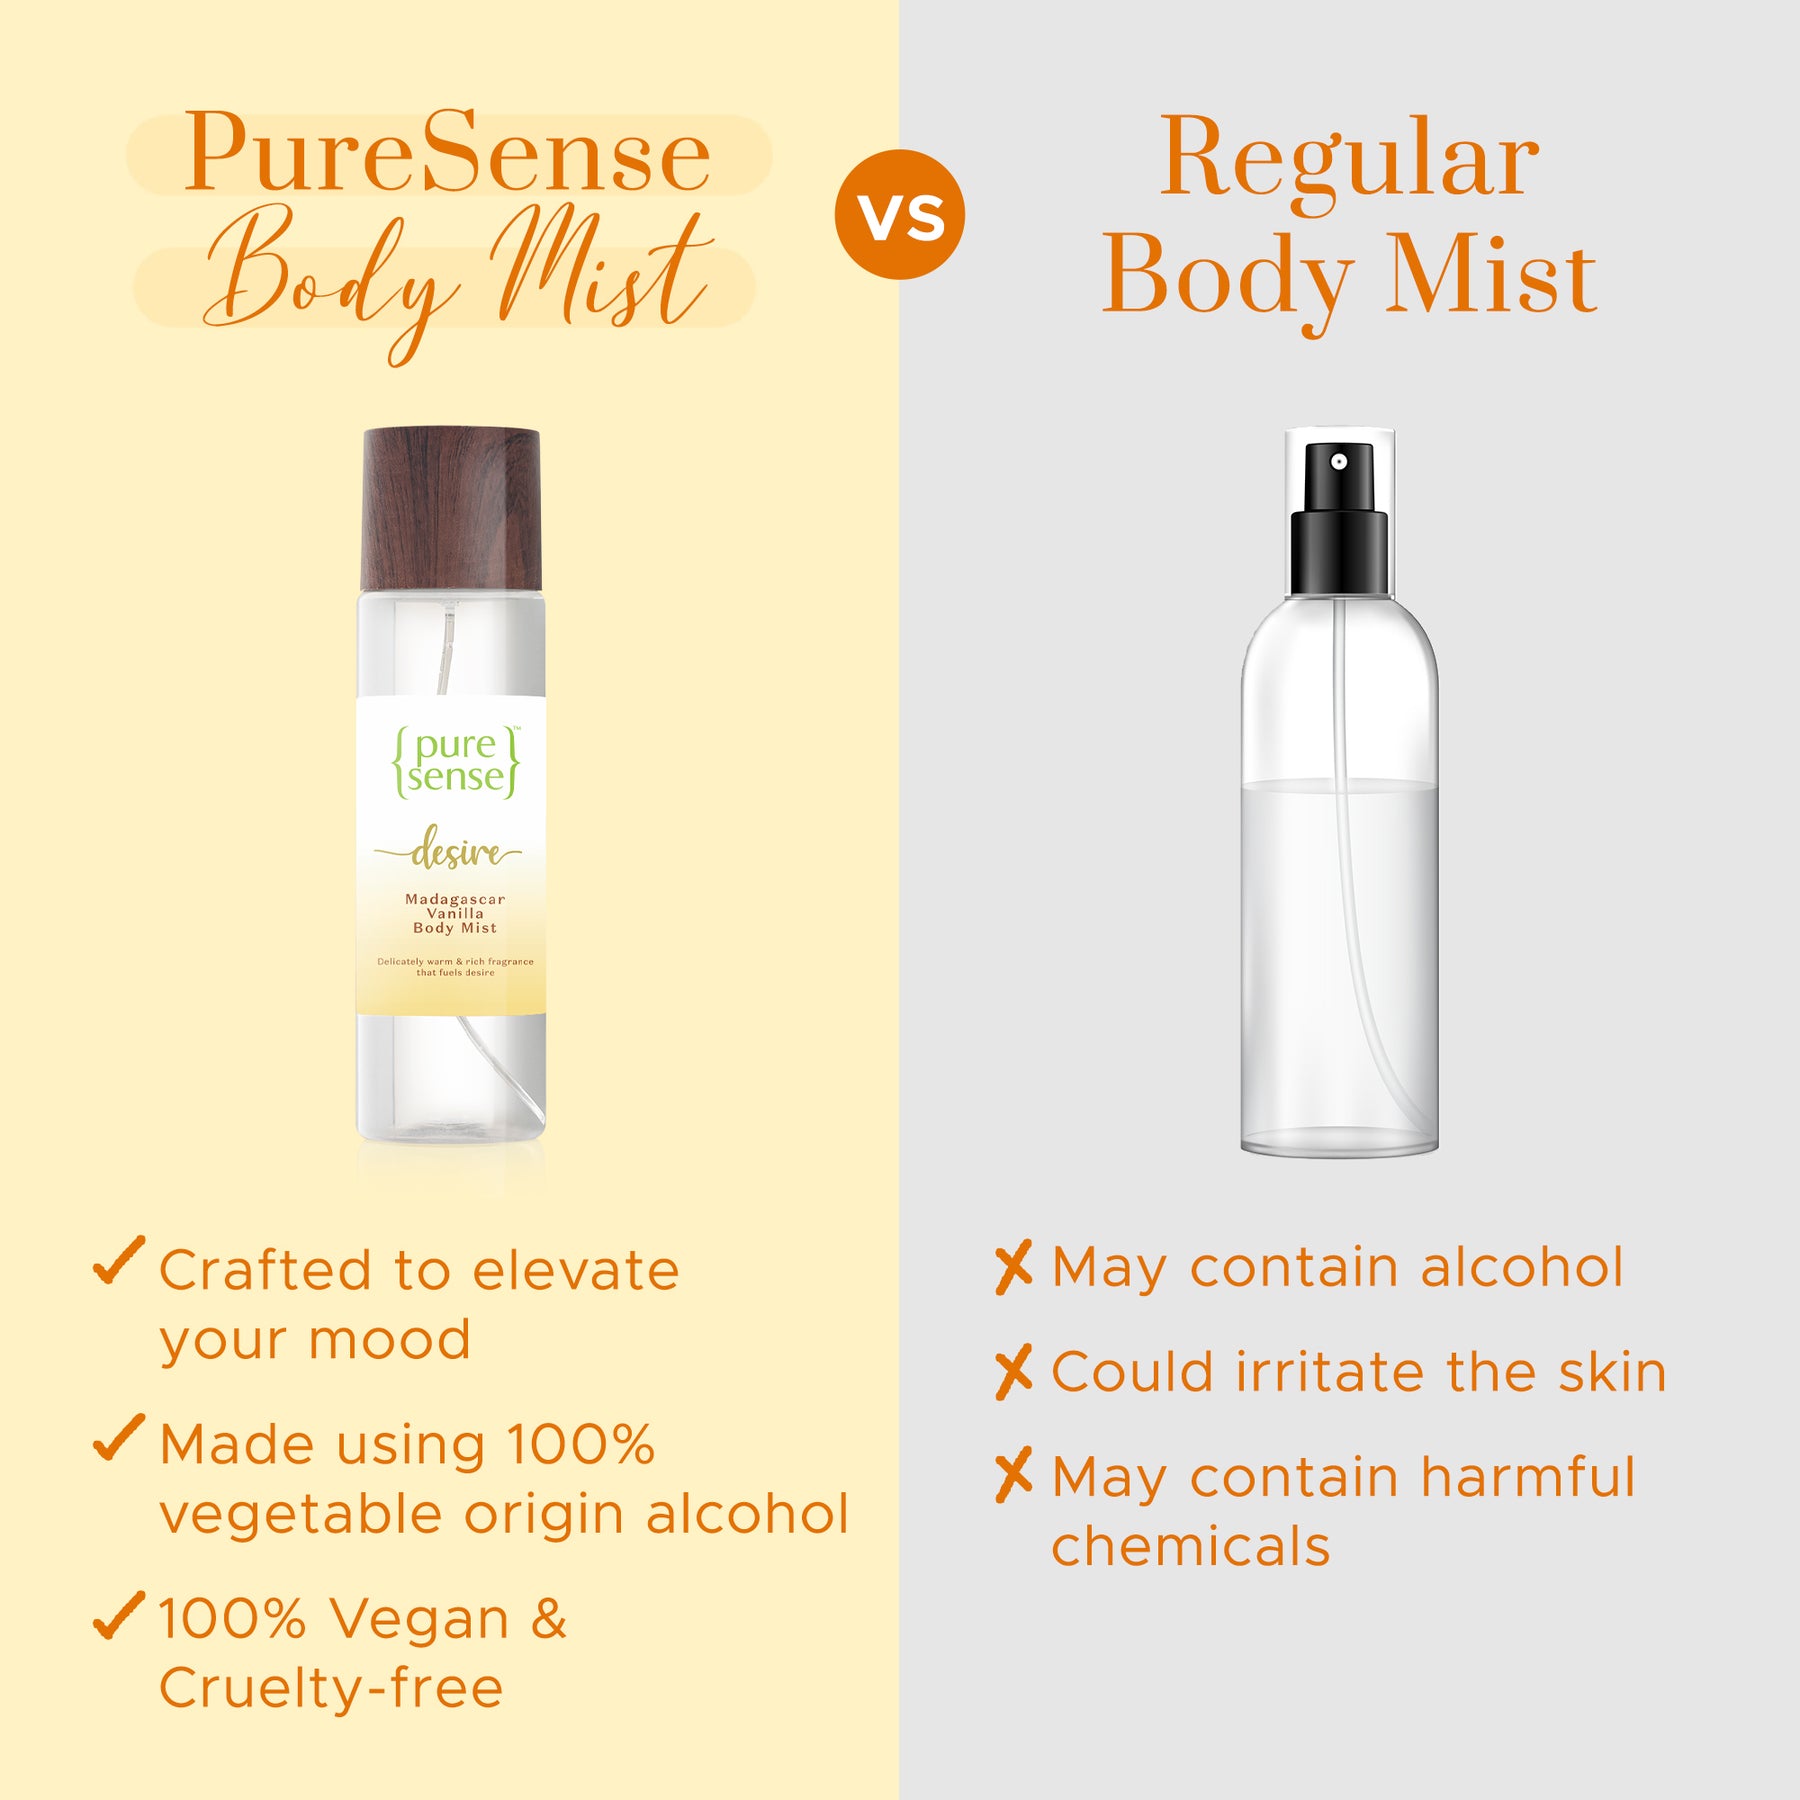 Desire Madagascar Vanilla Body Mist (Pack of 2) | From the makers of Parachute Advansed | 300ml - PureSense